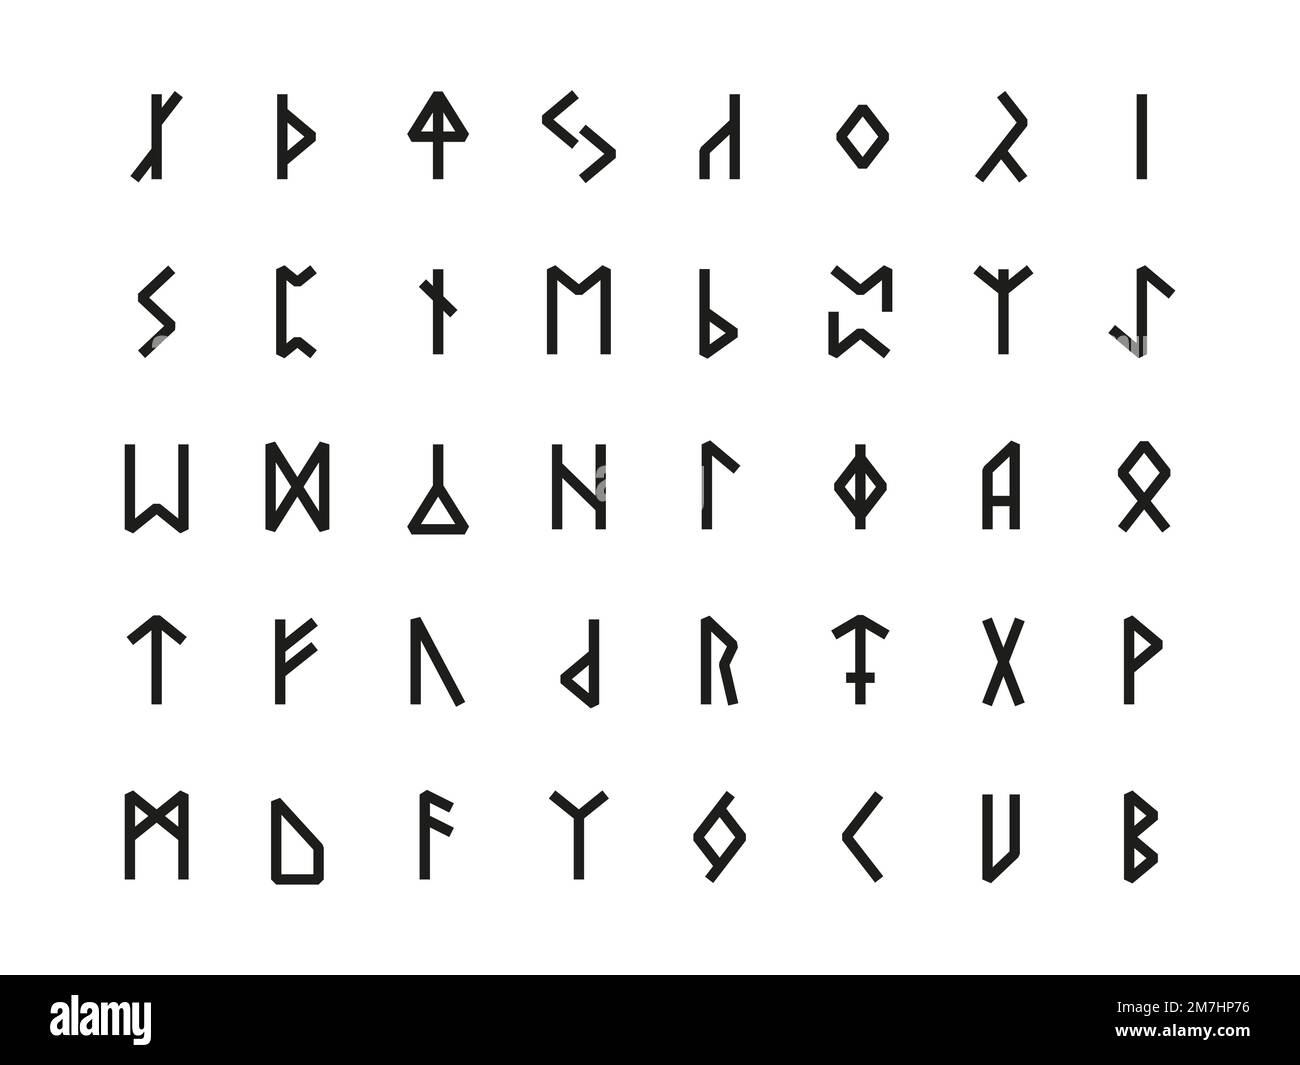 Runic hieroglyphics. Ancient nordic celtic alphabet with carved runes, old scandinavian sacred script letters germanic futhark culture signs. Vector collection of alphabet nordic illustration Stock Vector